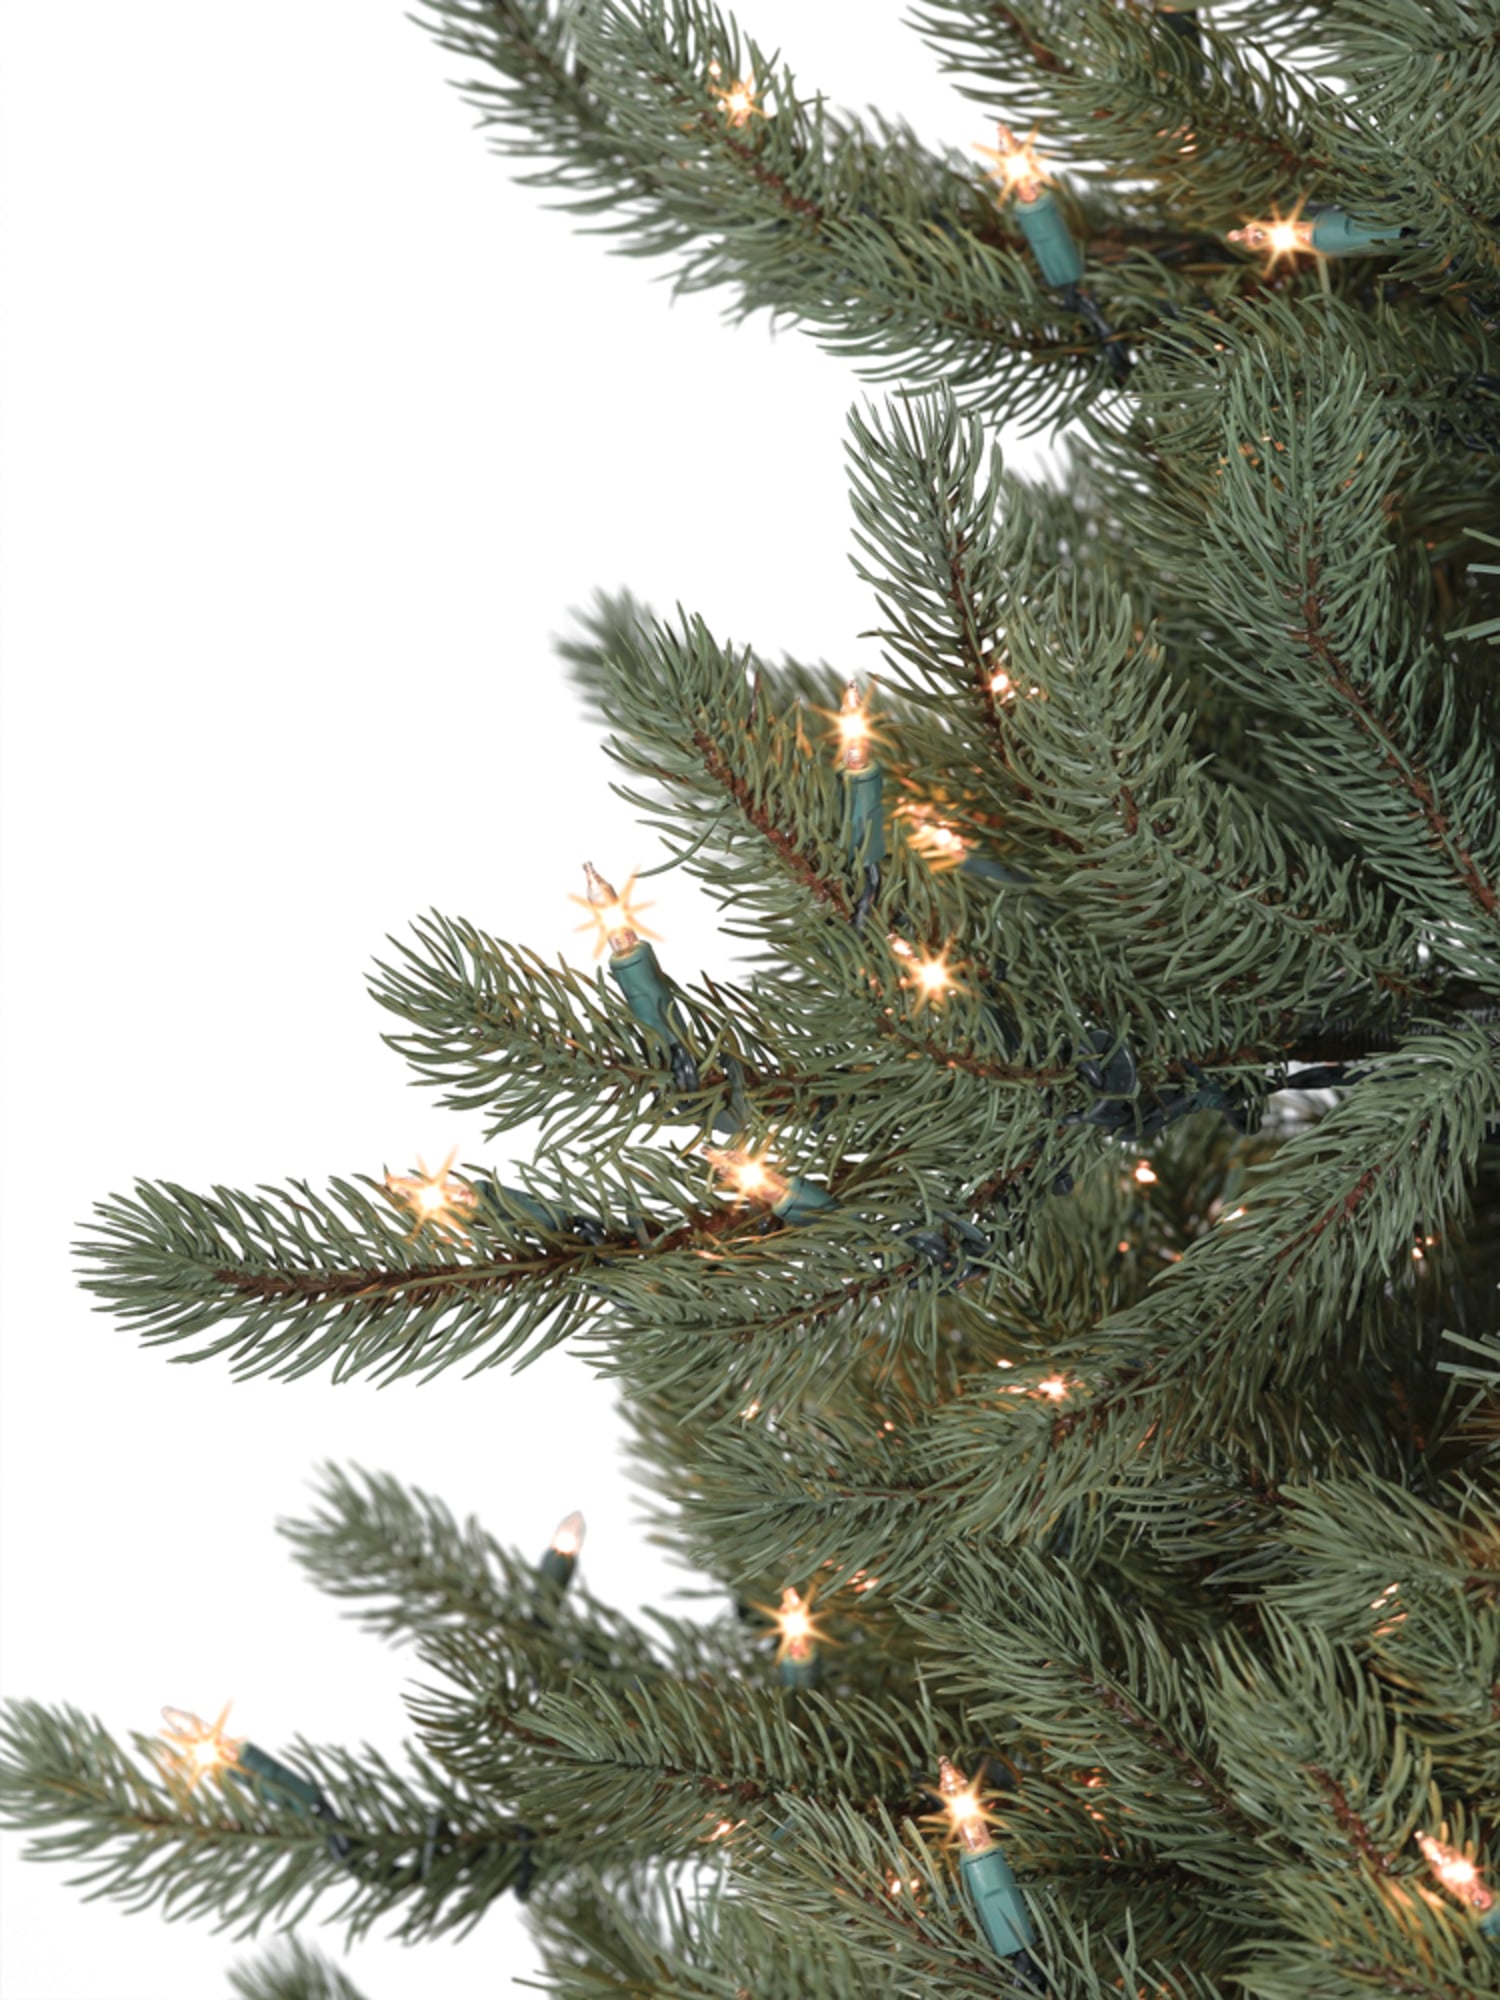 Older Holiday Decorations Can Pose Toxic Risk